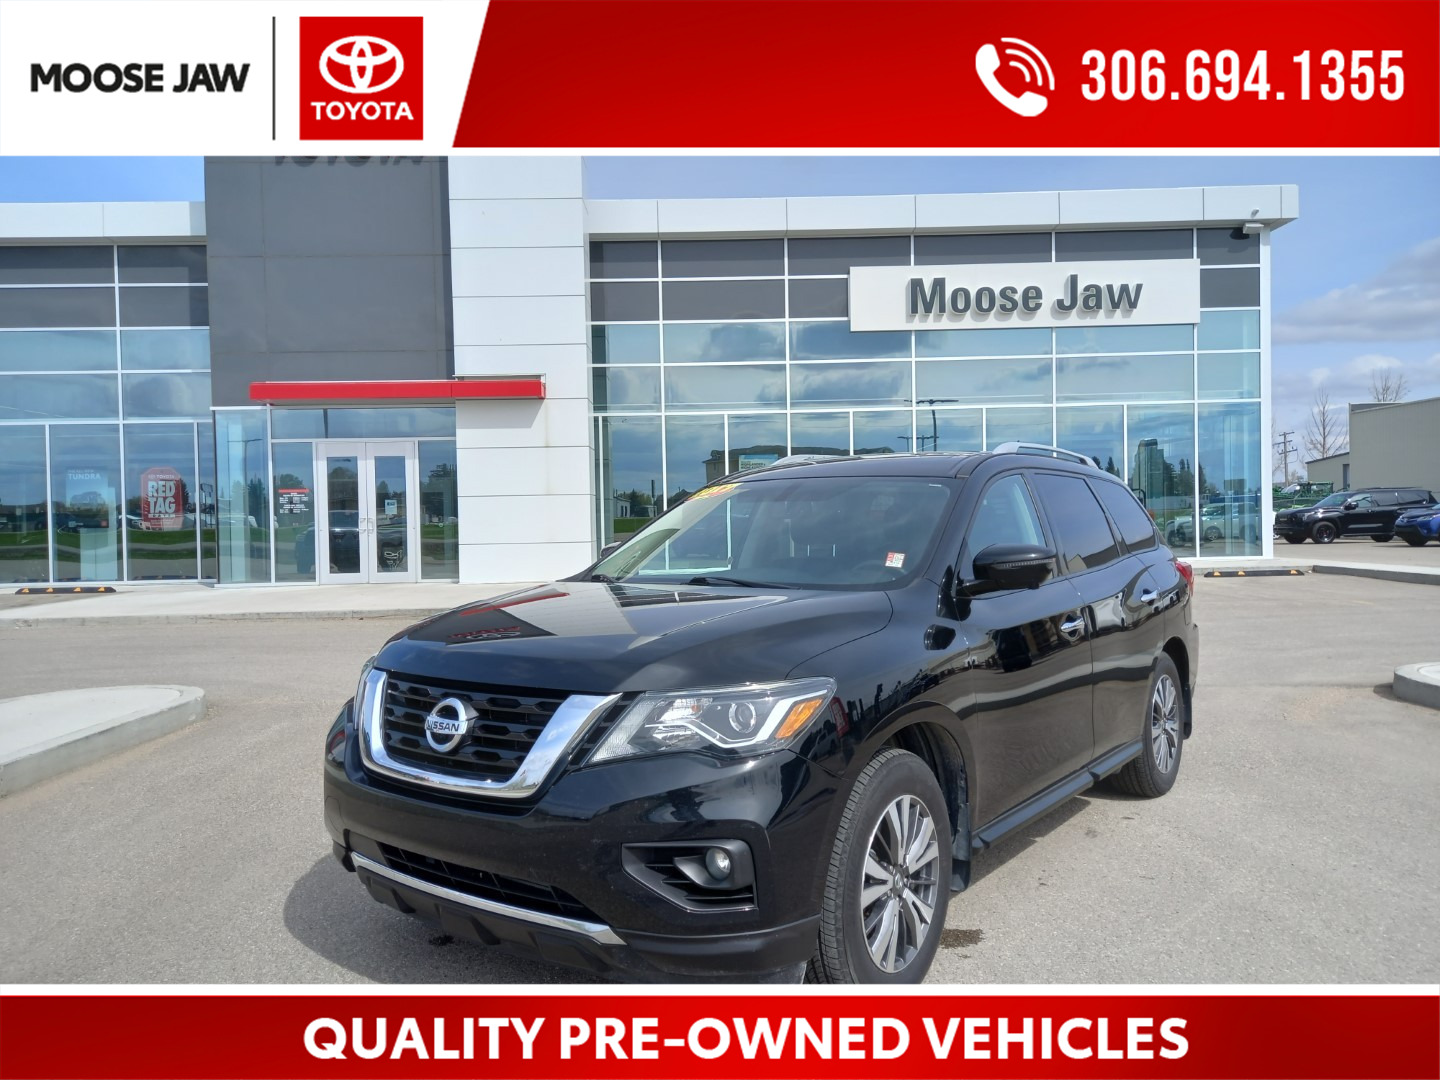 2017 Nissan Pathfinder SL LOCAL TRADE, WELL EQUIPPED SL MODEL